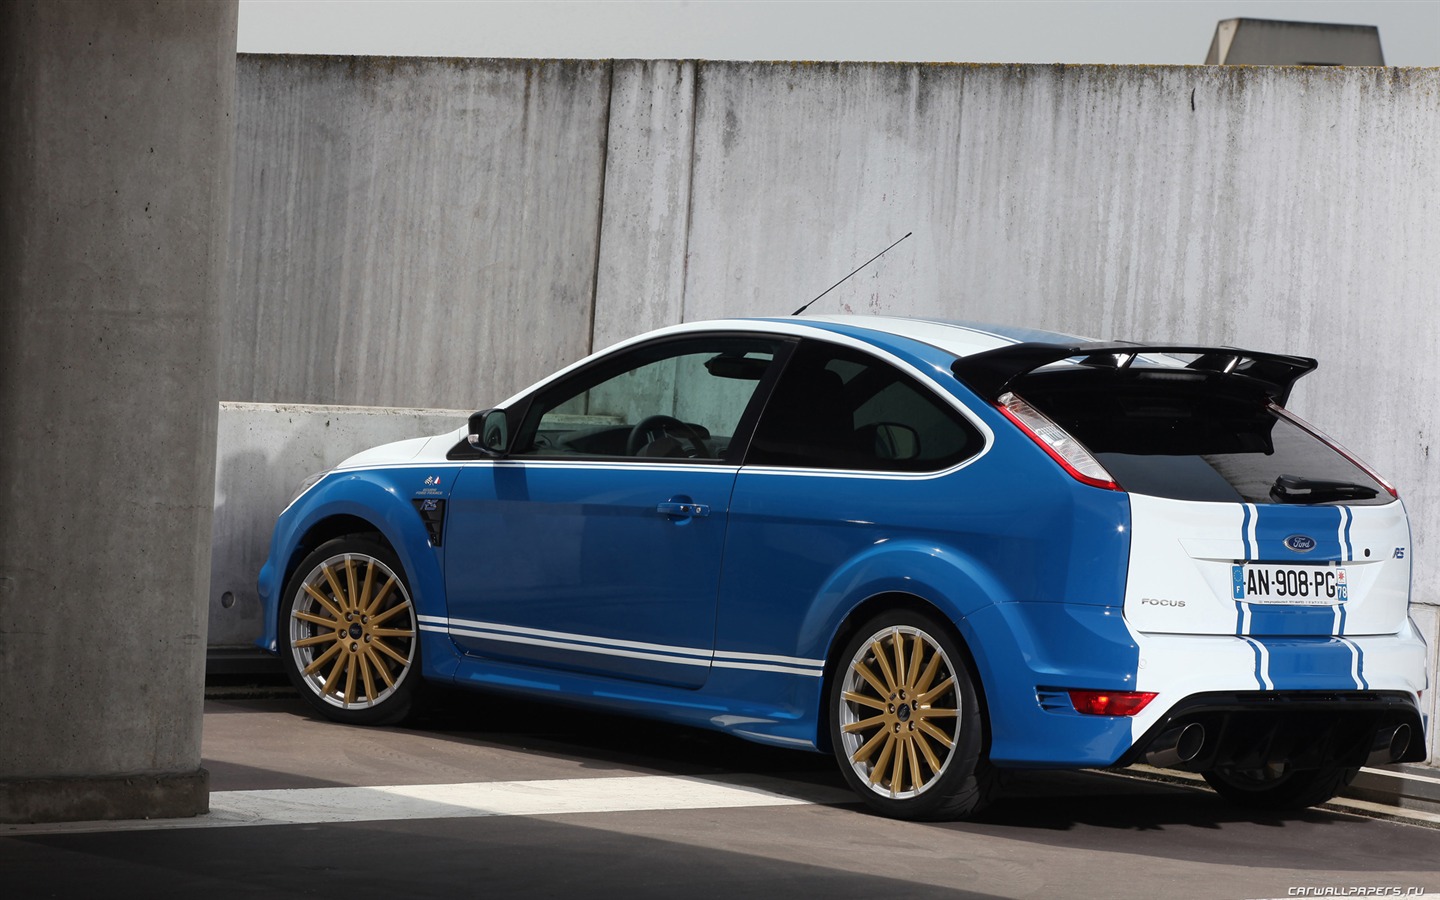 Ford Focus RS Le Mans Classic - 2010 福特5 - 1440x900